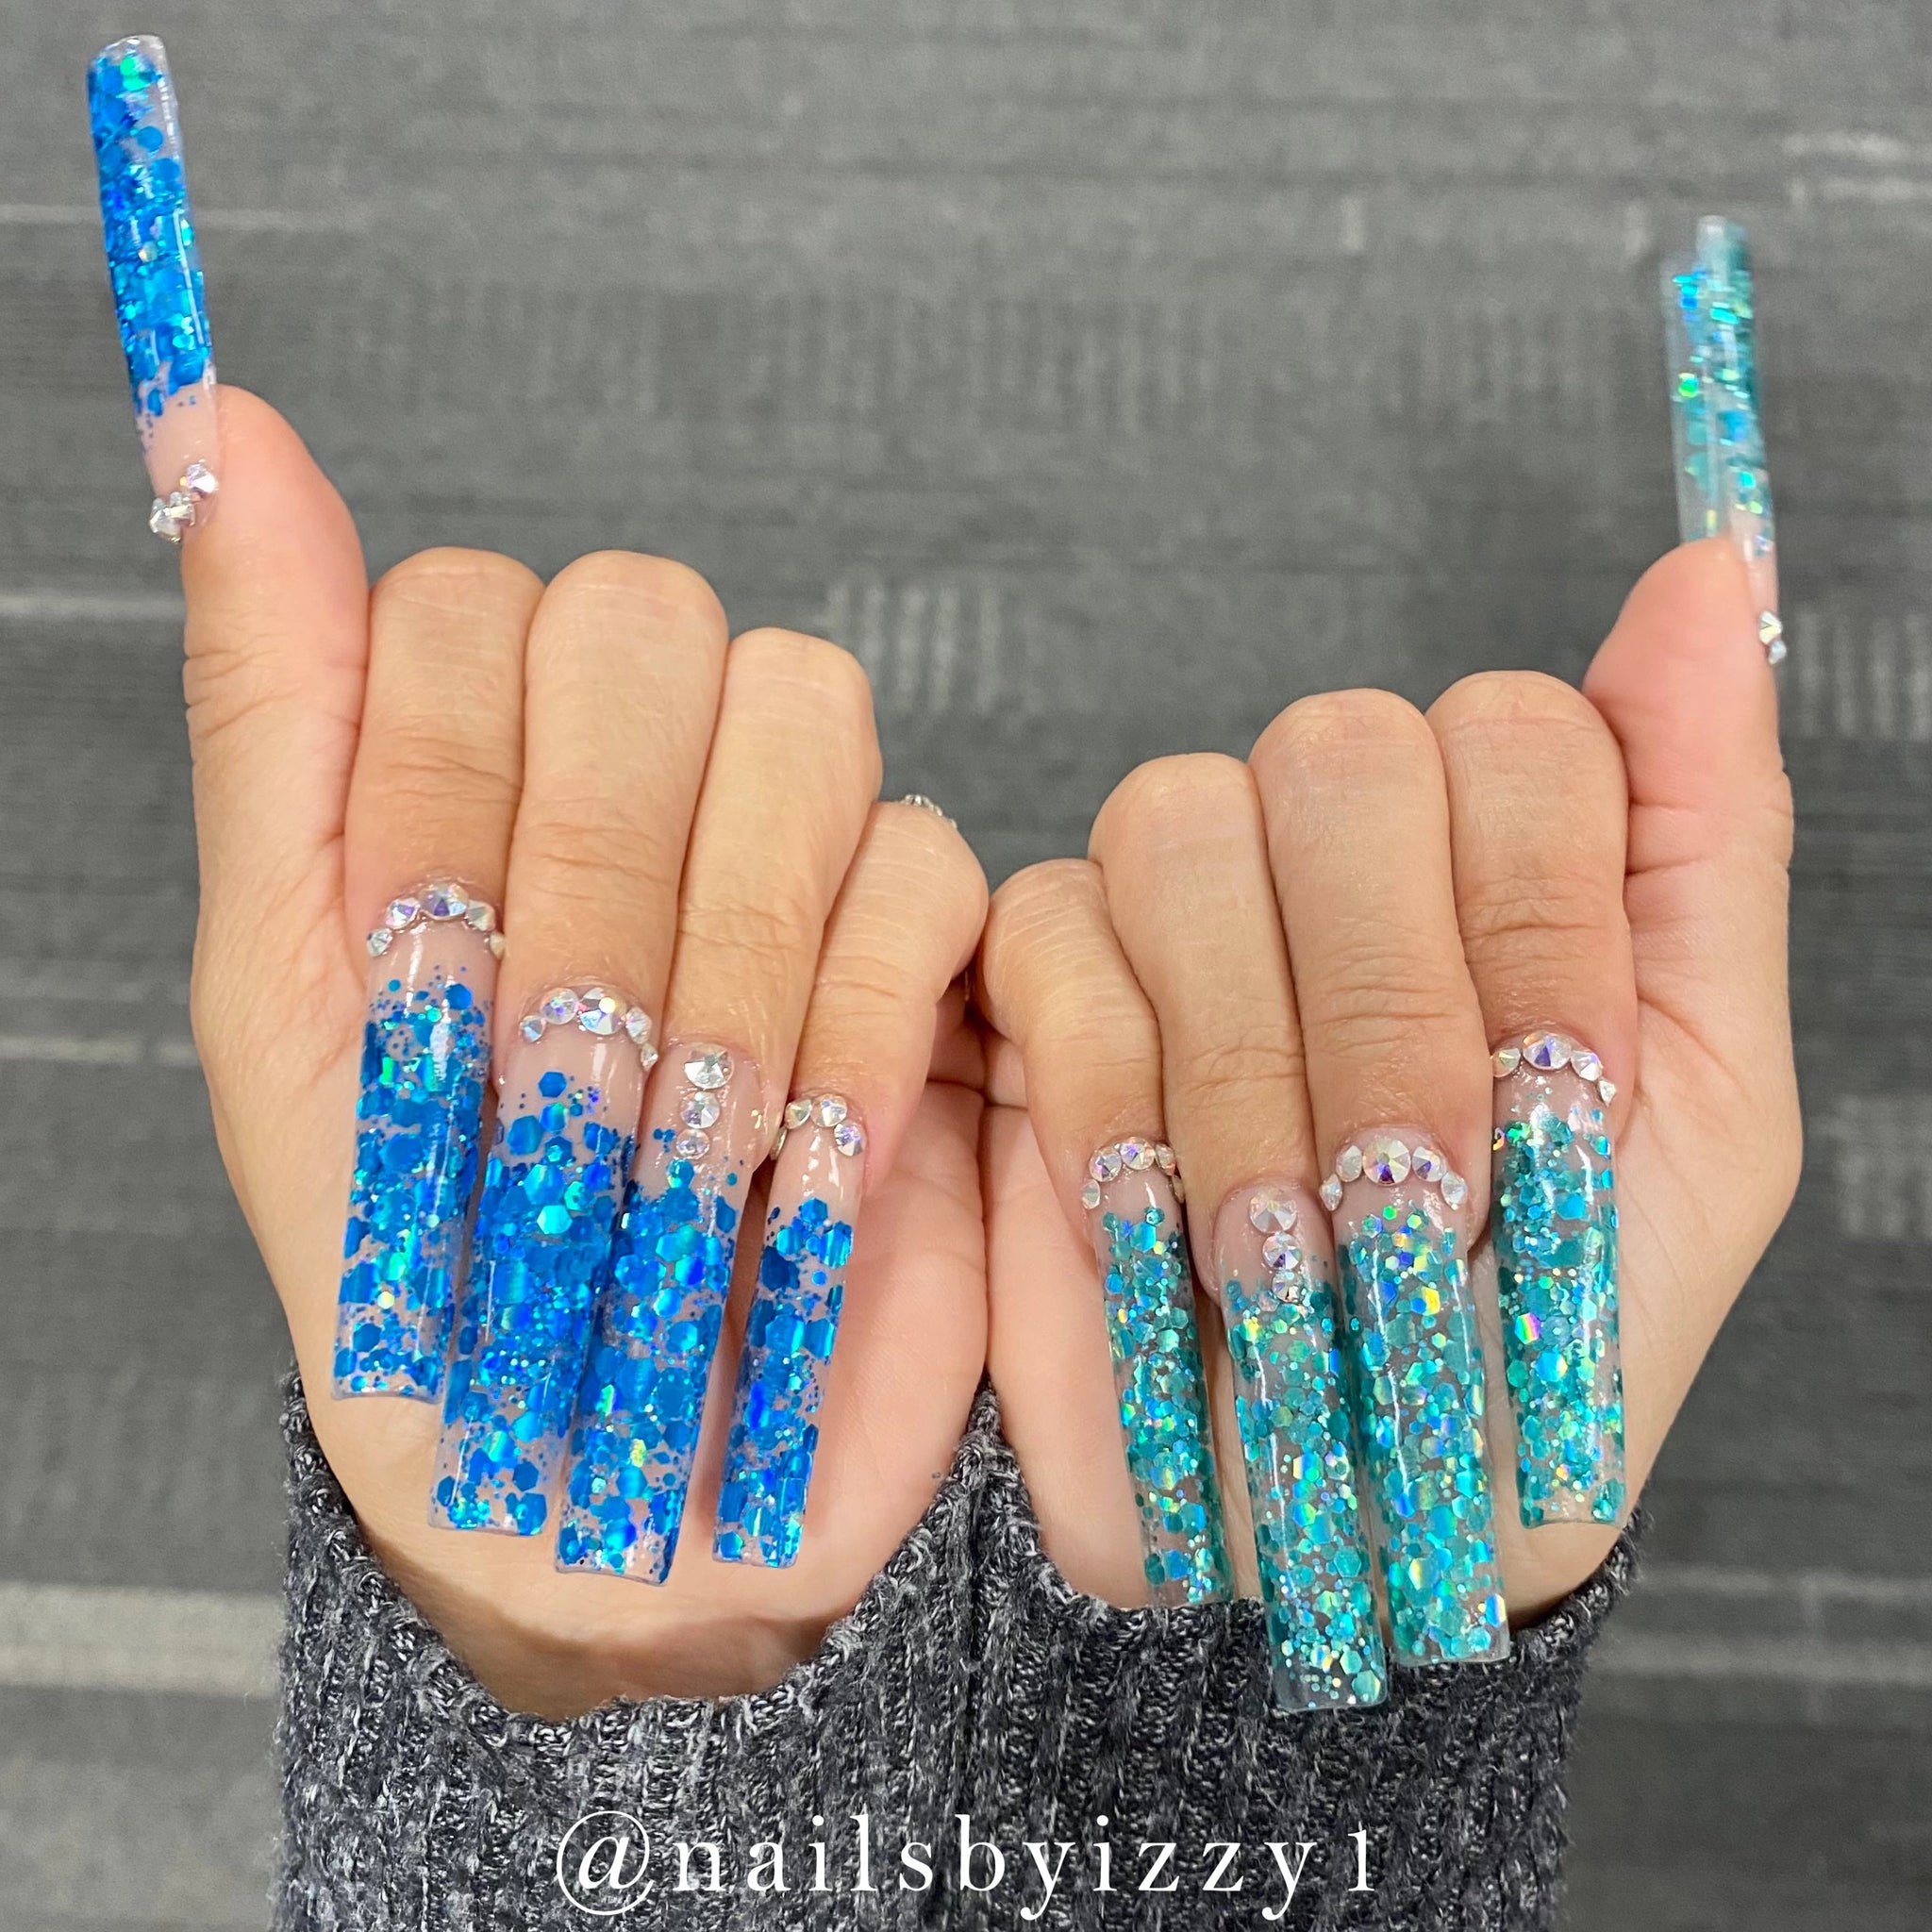 Blue Holographic Glitter Nails On The Left. Turquoise Holographic Glitter Nails On The Right.  A Photo From Our Customer, Ashley.